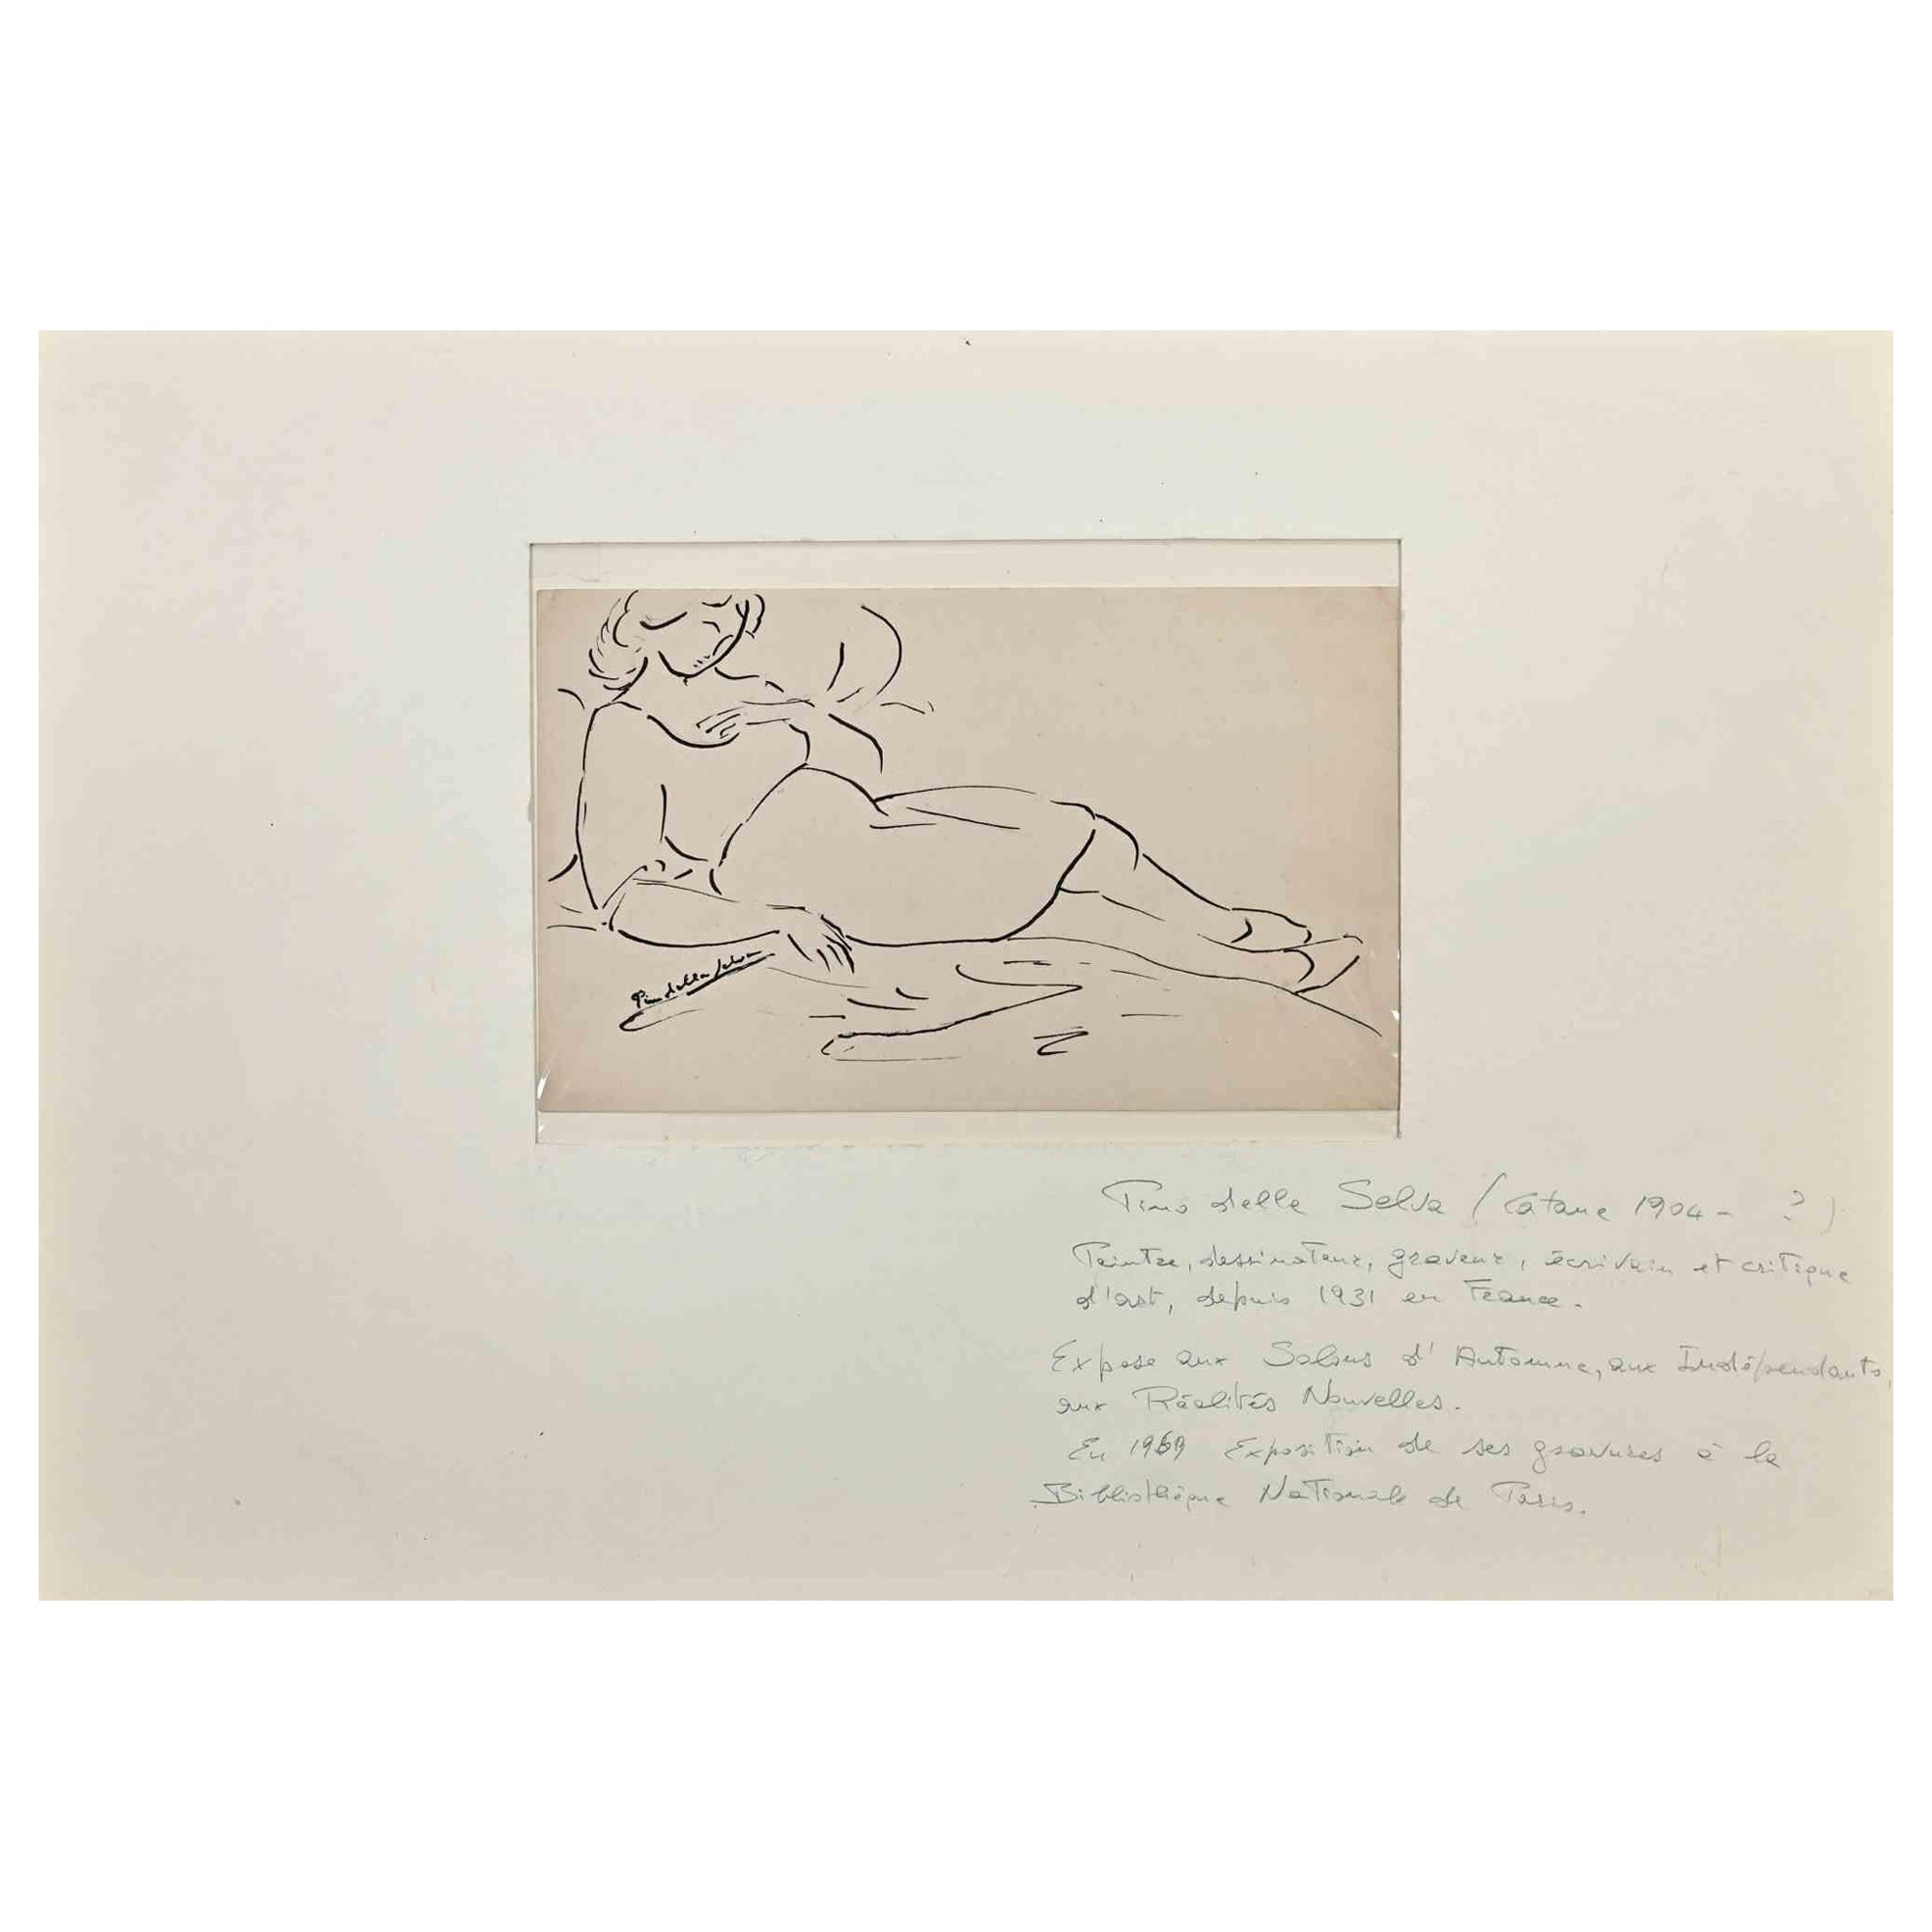 Half-strechted Woman is an Original China Ink Drawing realized by Pino della Selva (1904-1987).

Good condition included a white cardboard passpartout (35x50 cm).

Hand-signed by the artist on the lower left corner.

Pino della Selva (pseudonym of